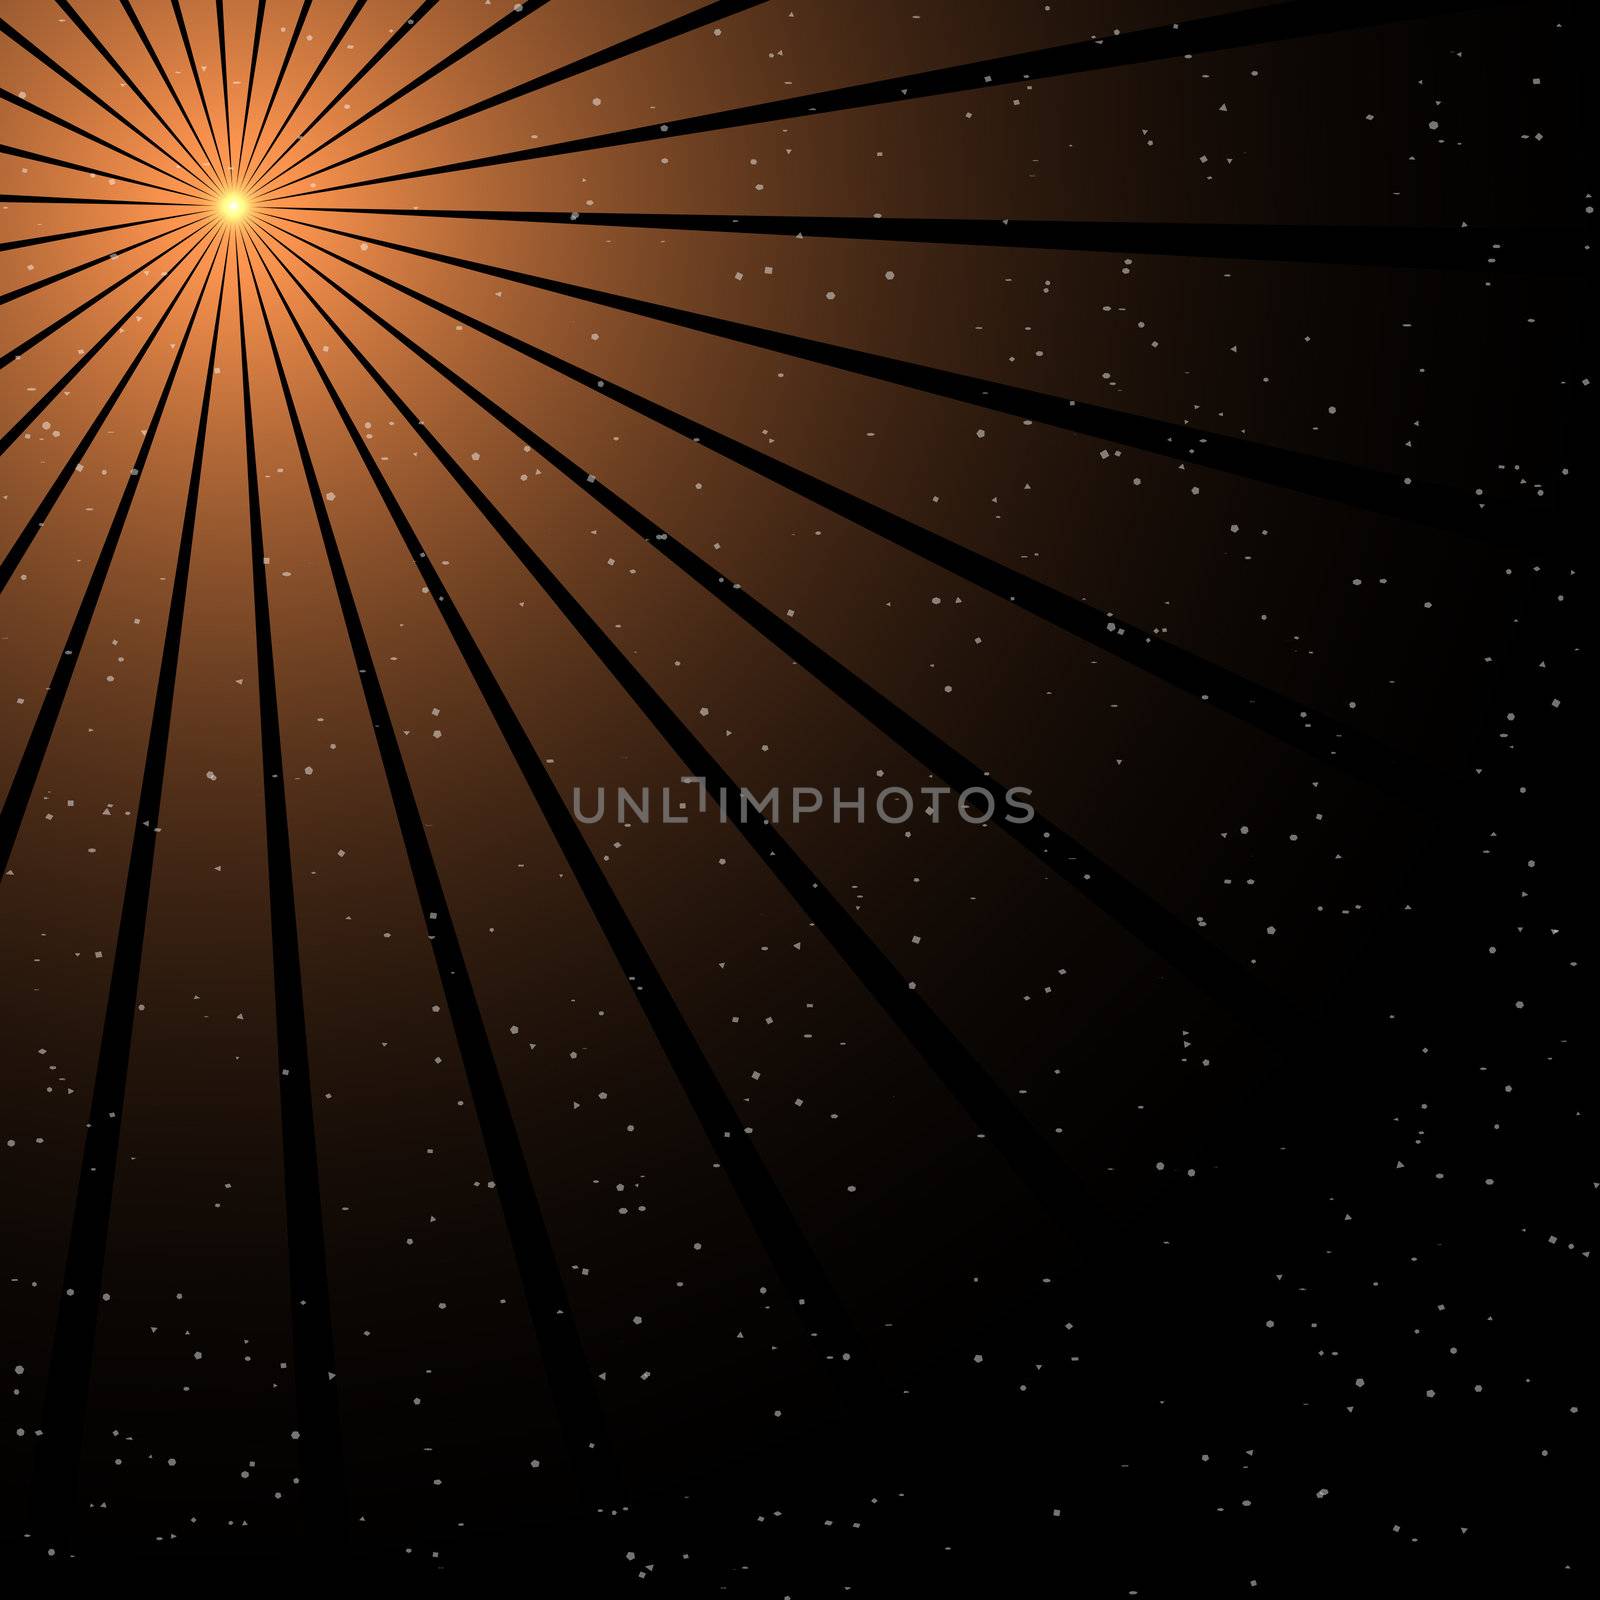 Ray of light - star background by robbino